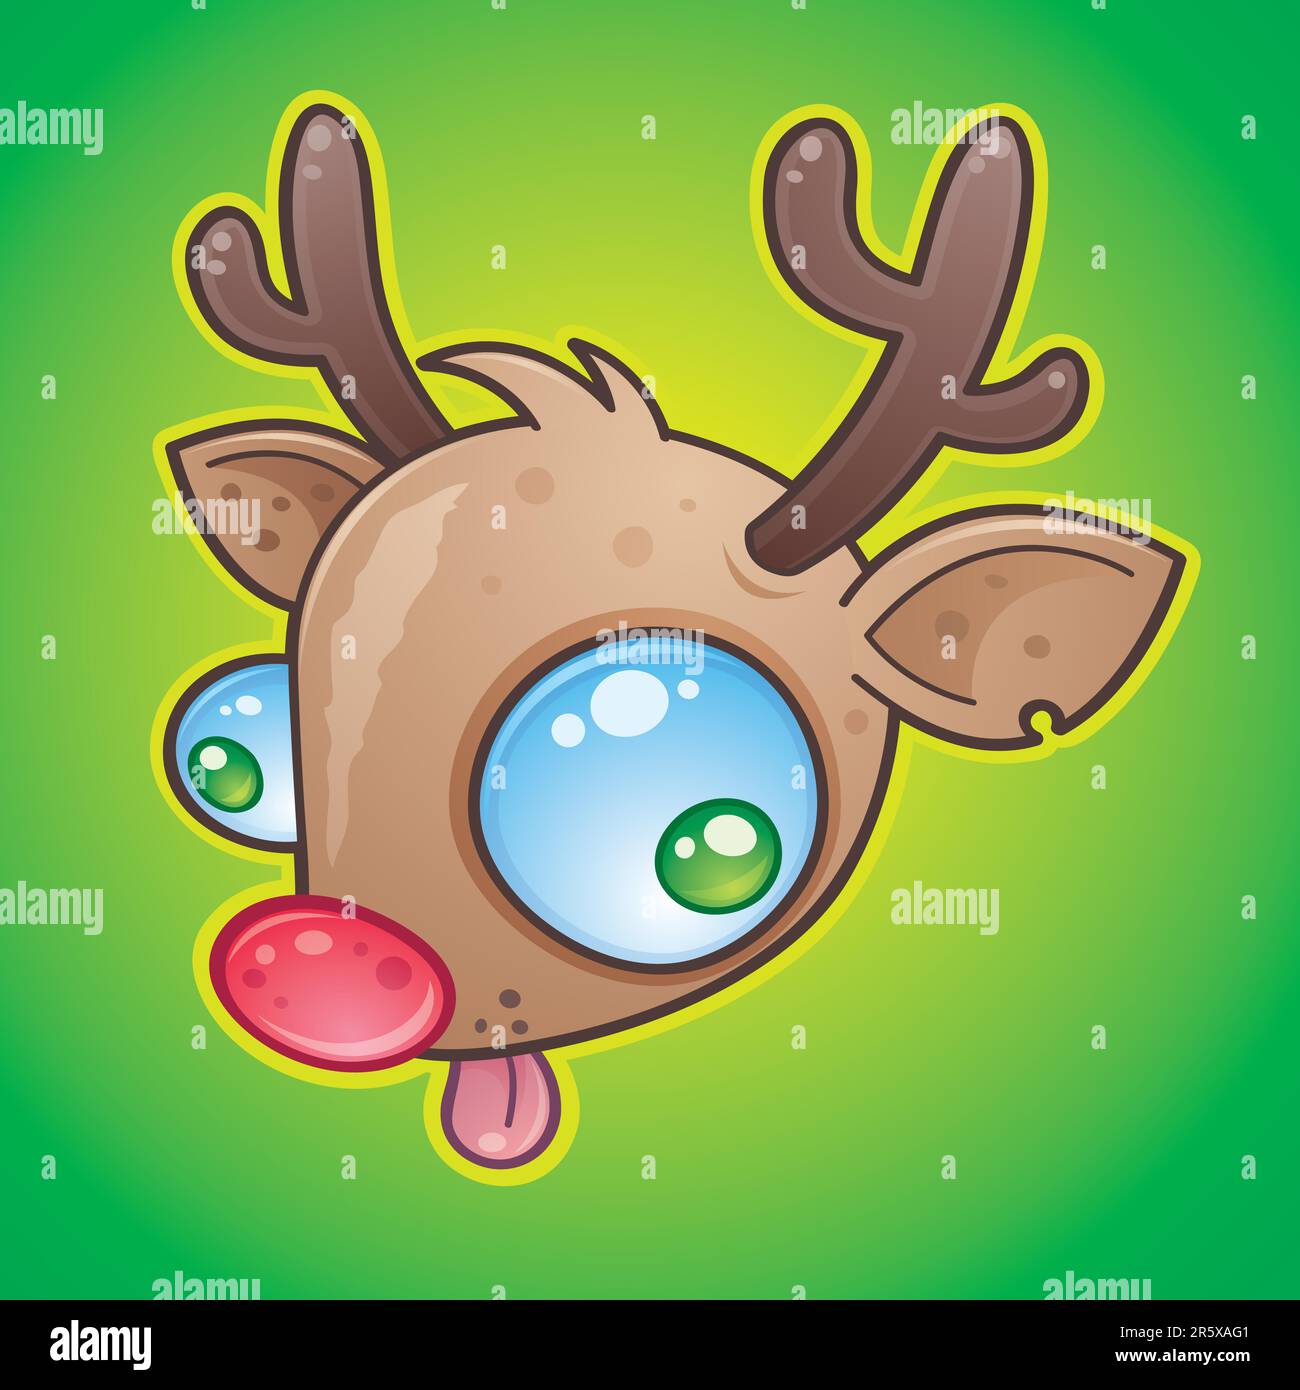 Wacky Rudolph The Red Nosed Reindeer face with bulging eyes sticking out his tongue. drawn in a humorous cartoon style. Stock Vector